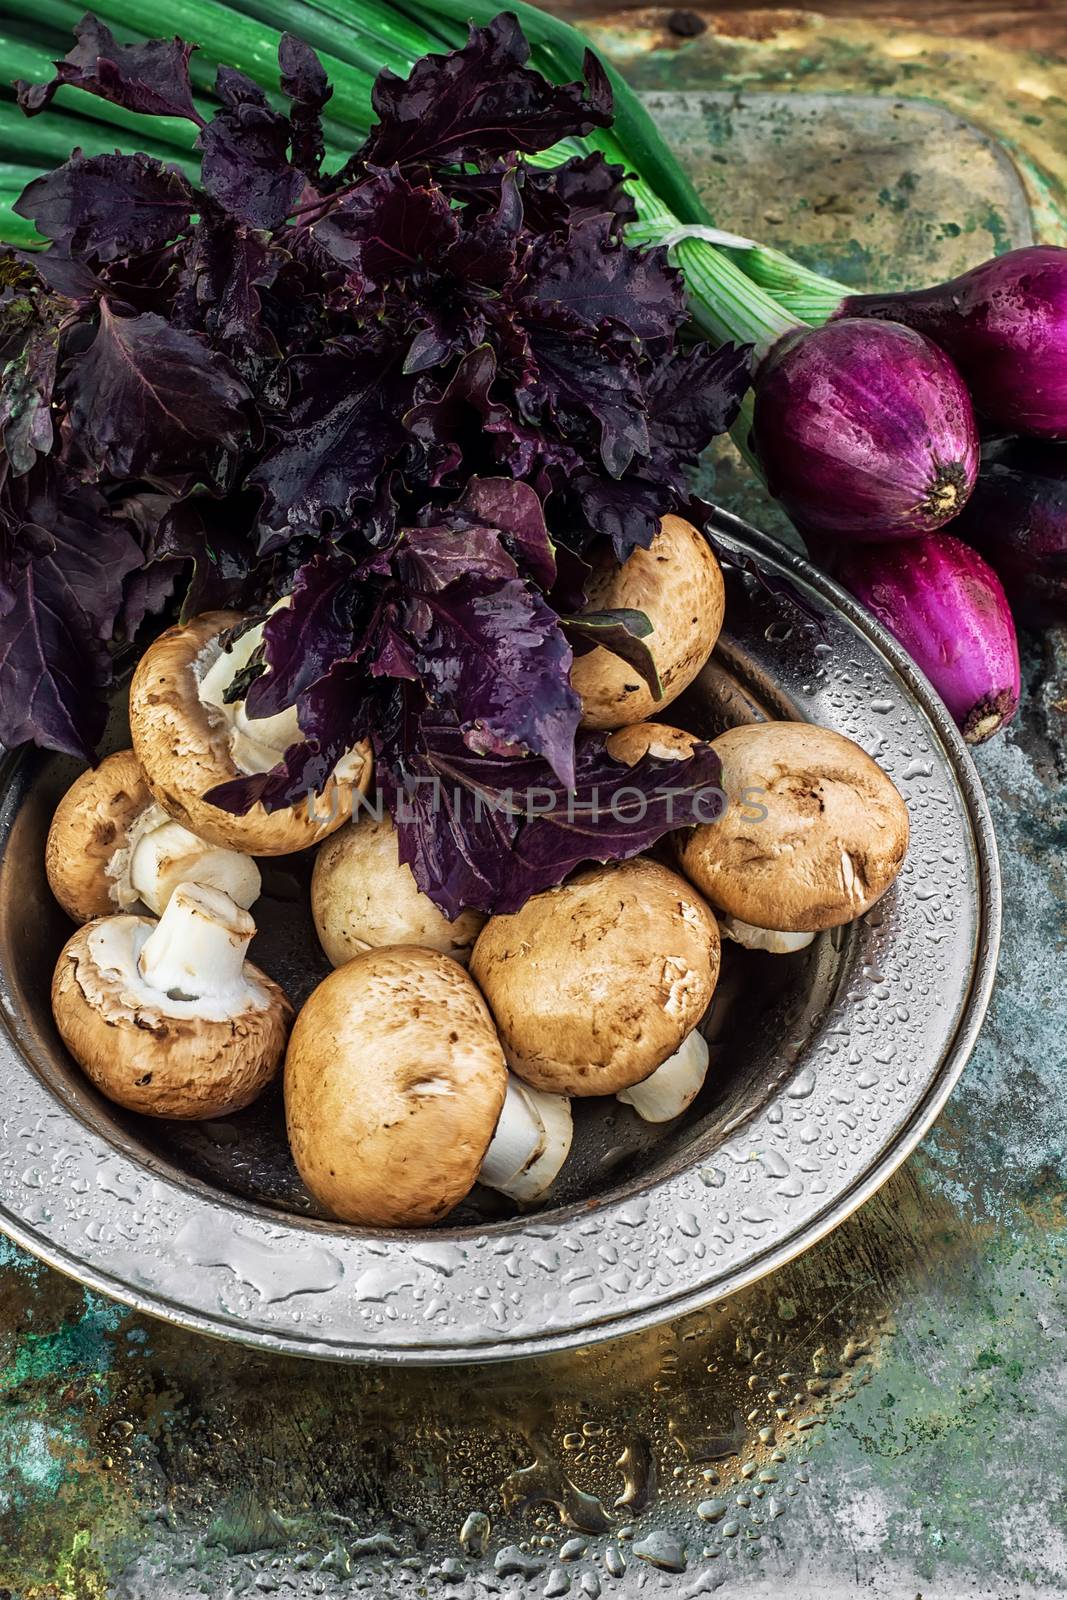 color onions and mushrooms on an iron plate in spray of water.Photo tinted